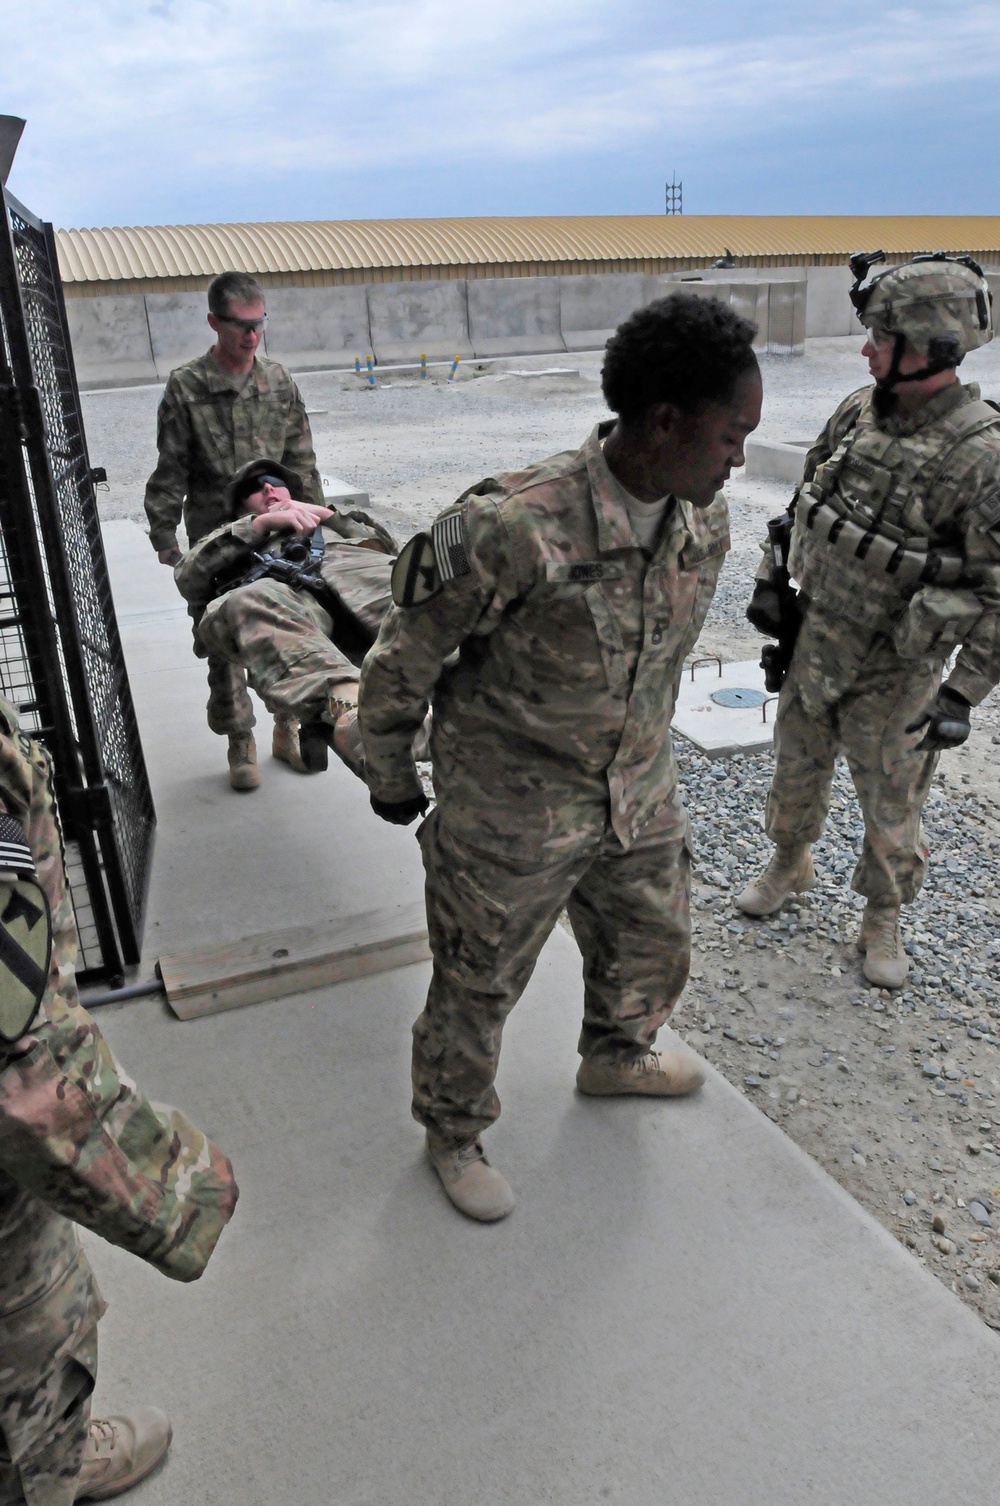 Combat medics sharpen skills during mass casualty exercise